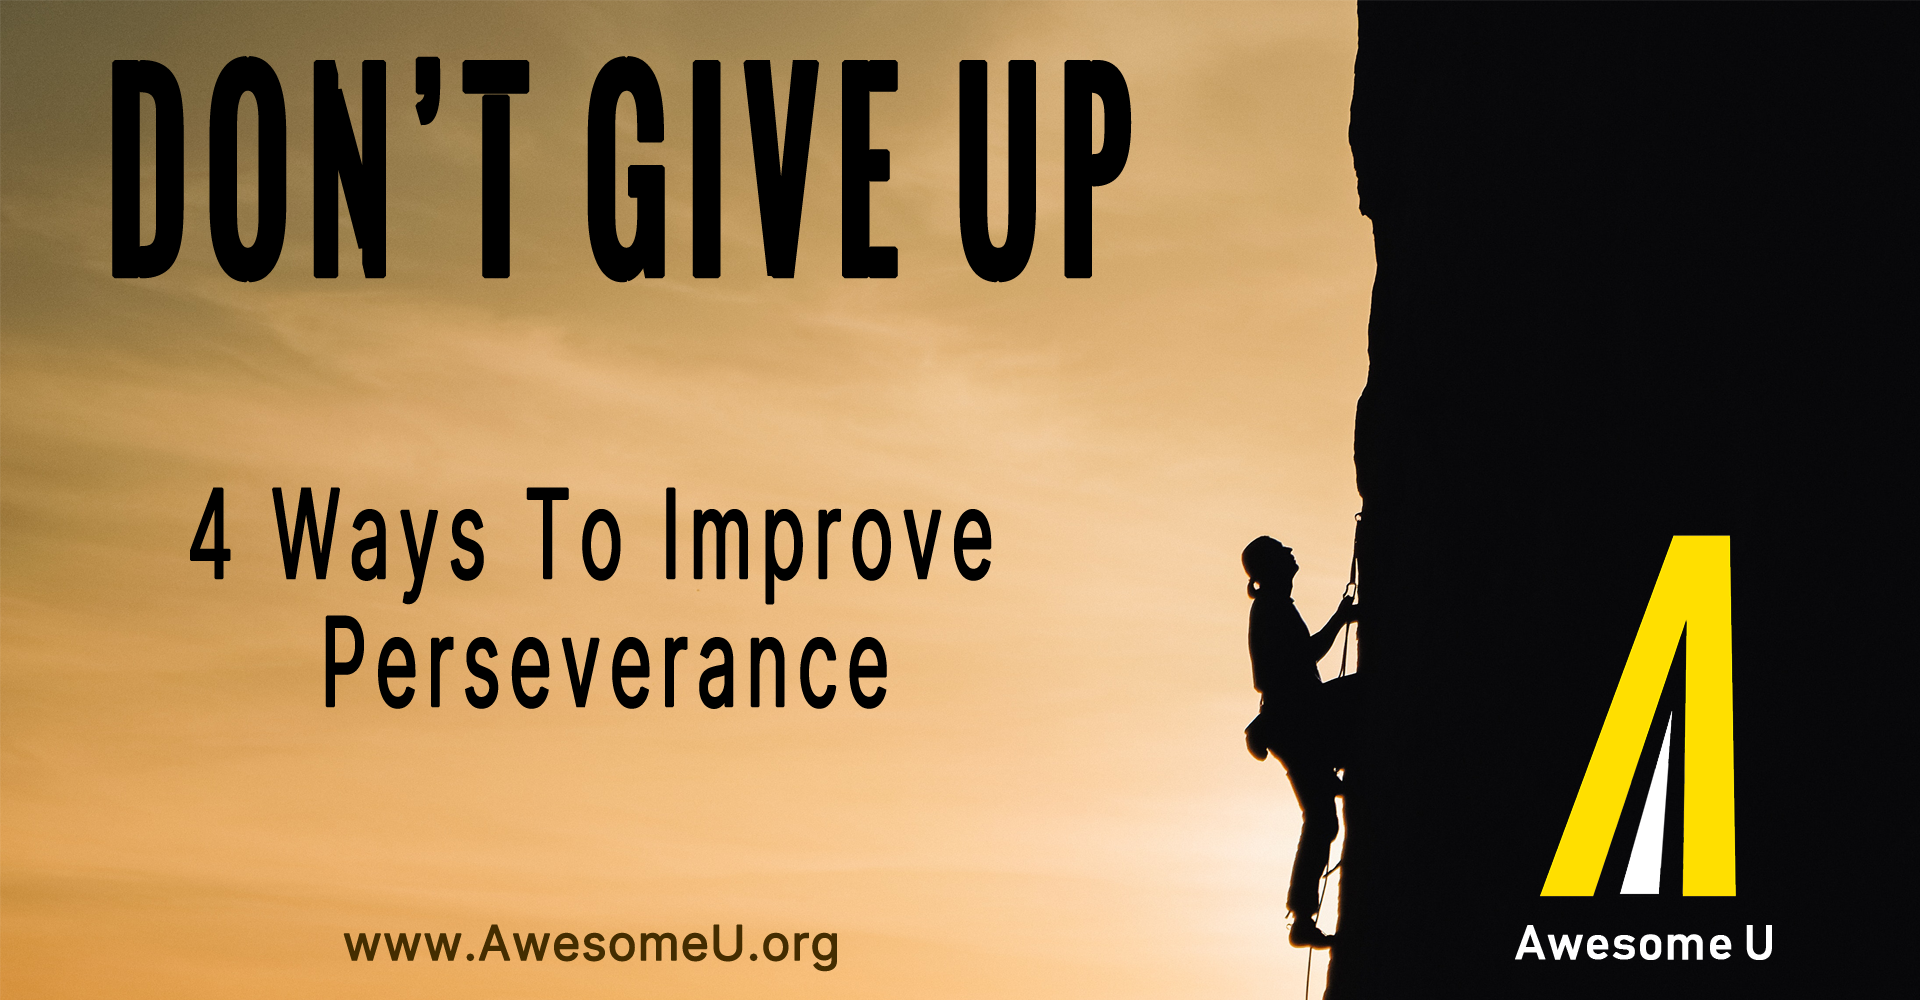 Don't Give Up - 4 Ways To Improve Perseverance